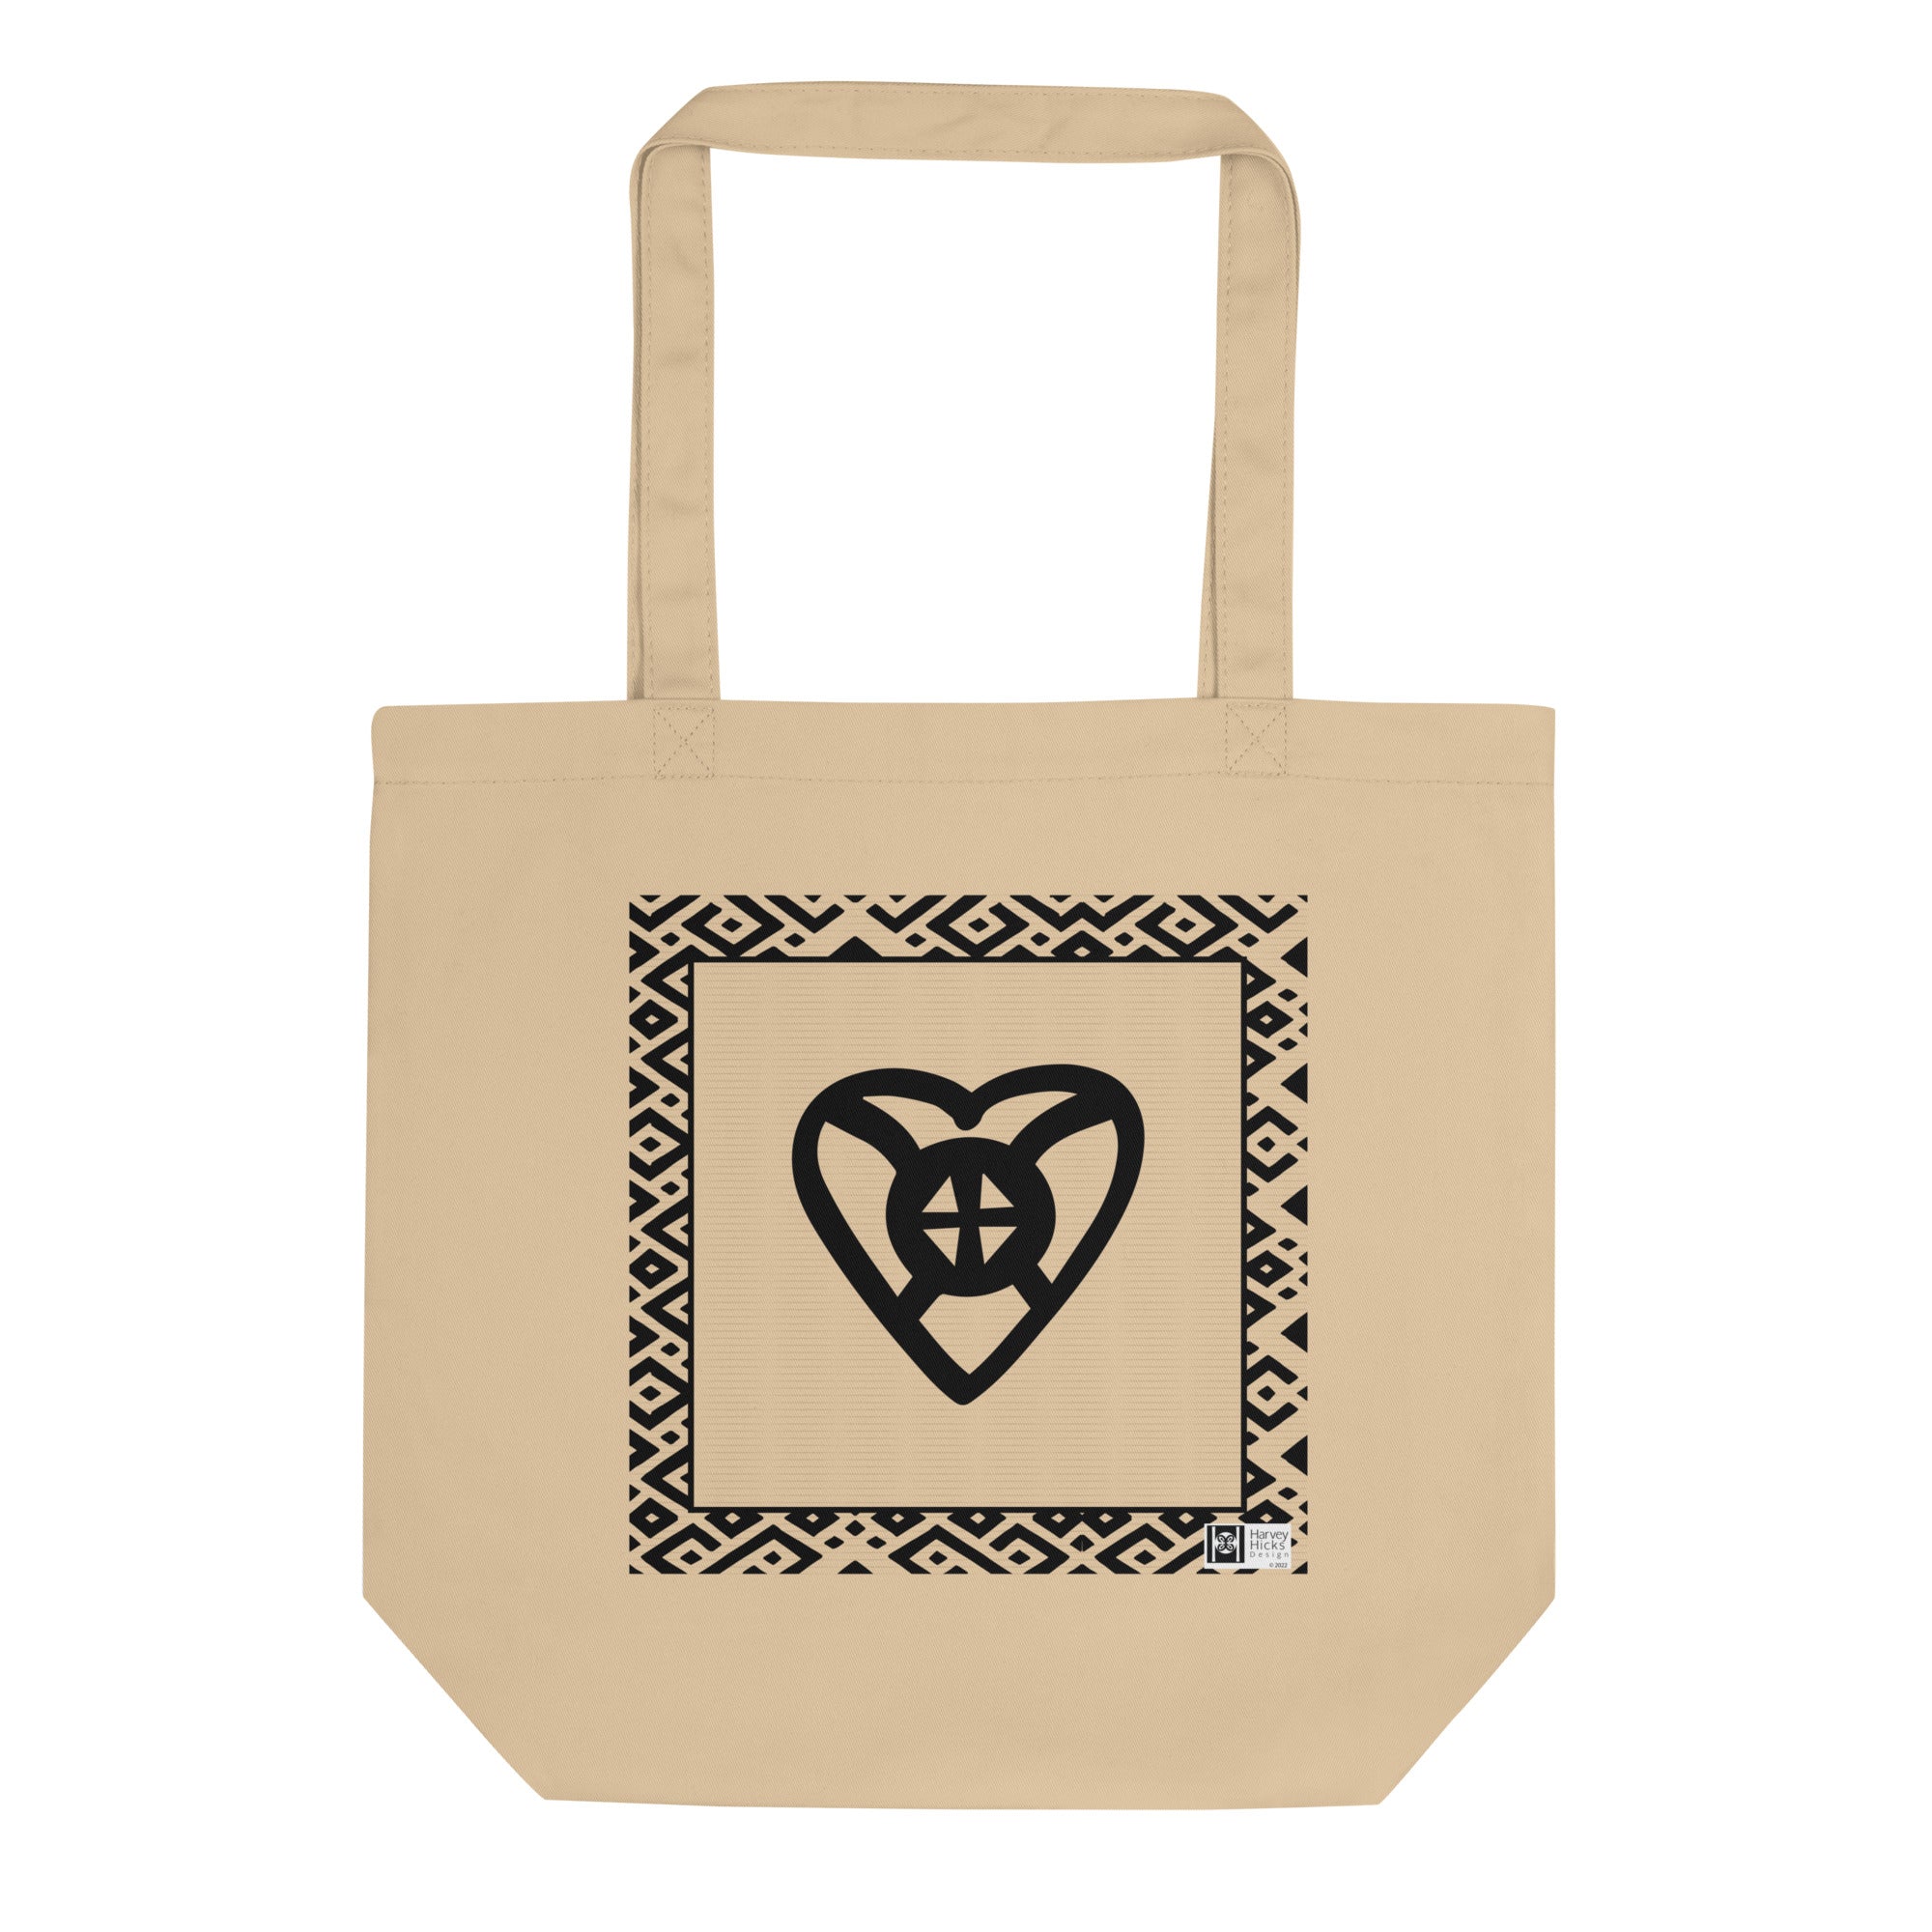 100% cotton Eco Tote Bag, featuring the Adinkra symbol for all will be well, NO TEXT